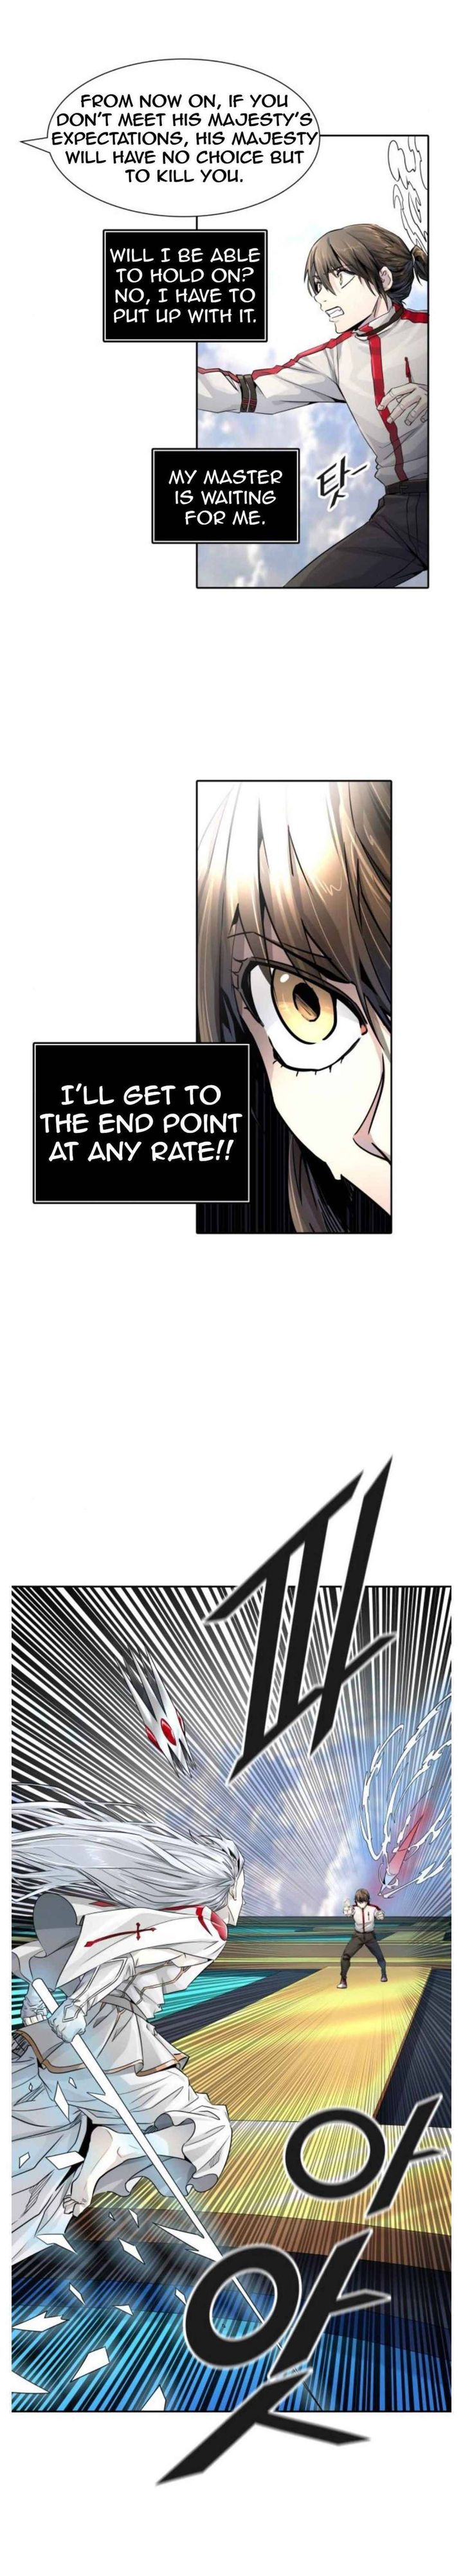 Tower Of God 496 20